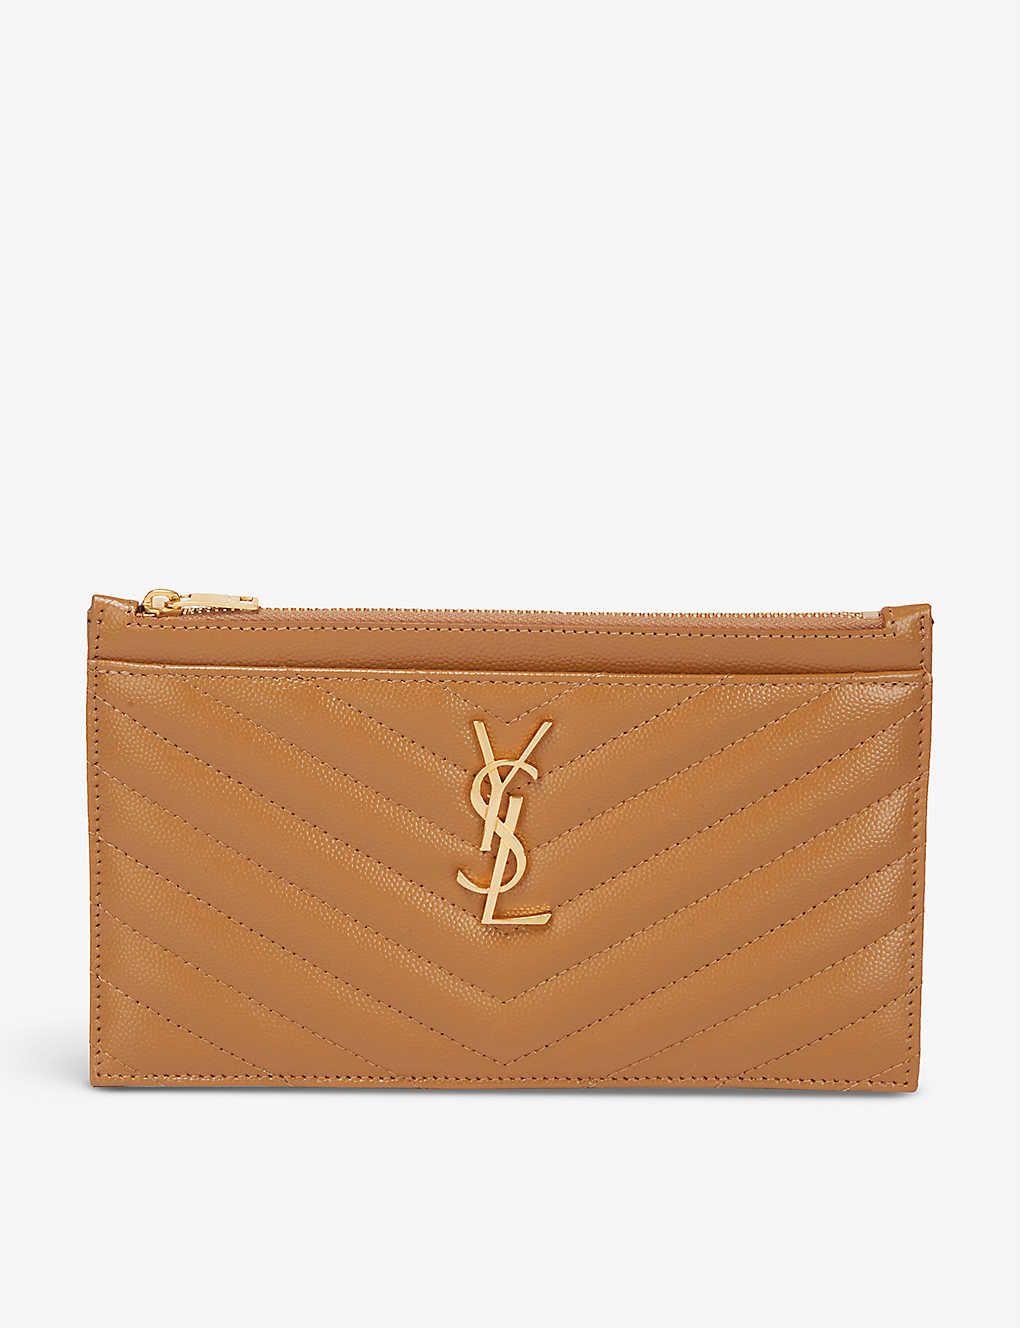 Monogram quilted leather clutch | Selfridges